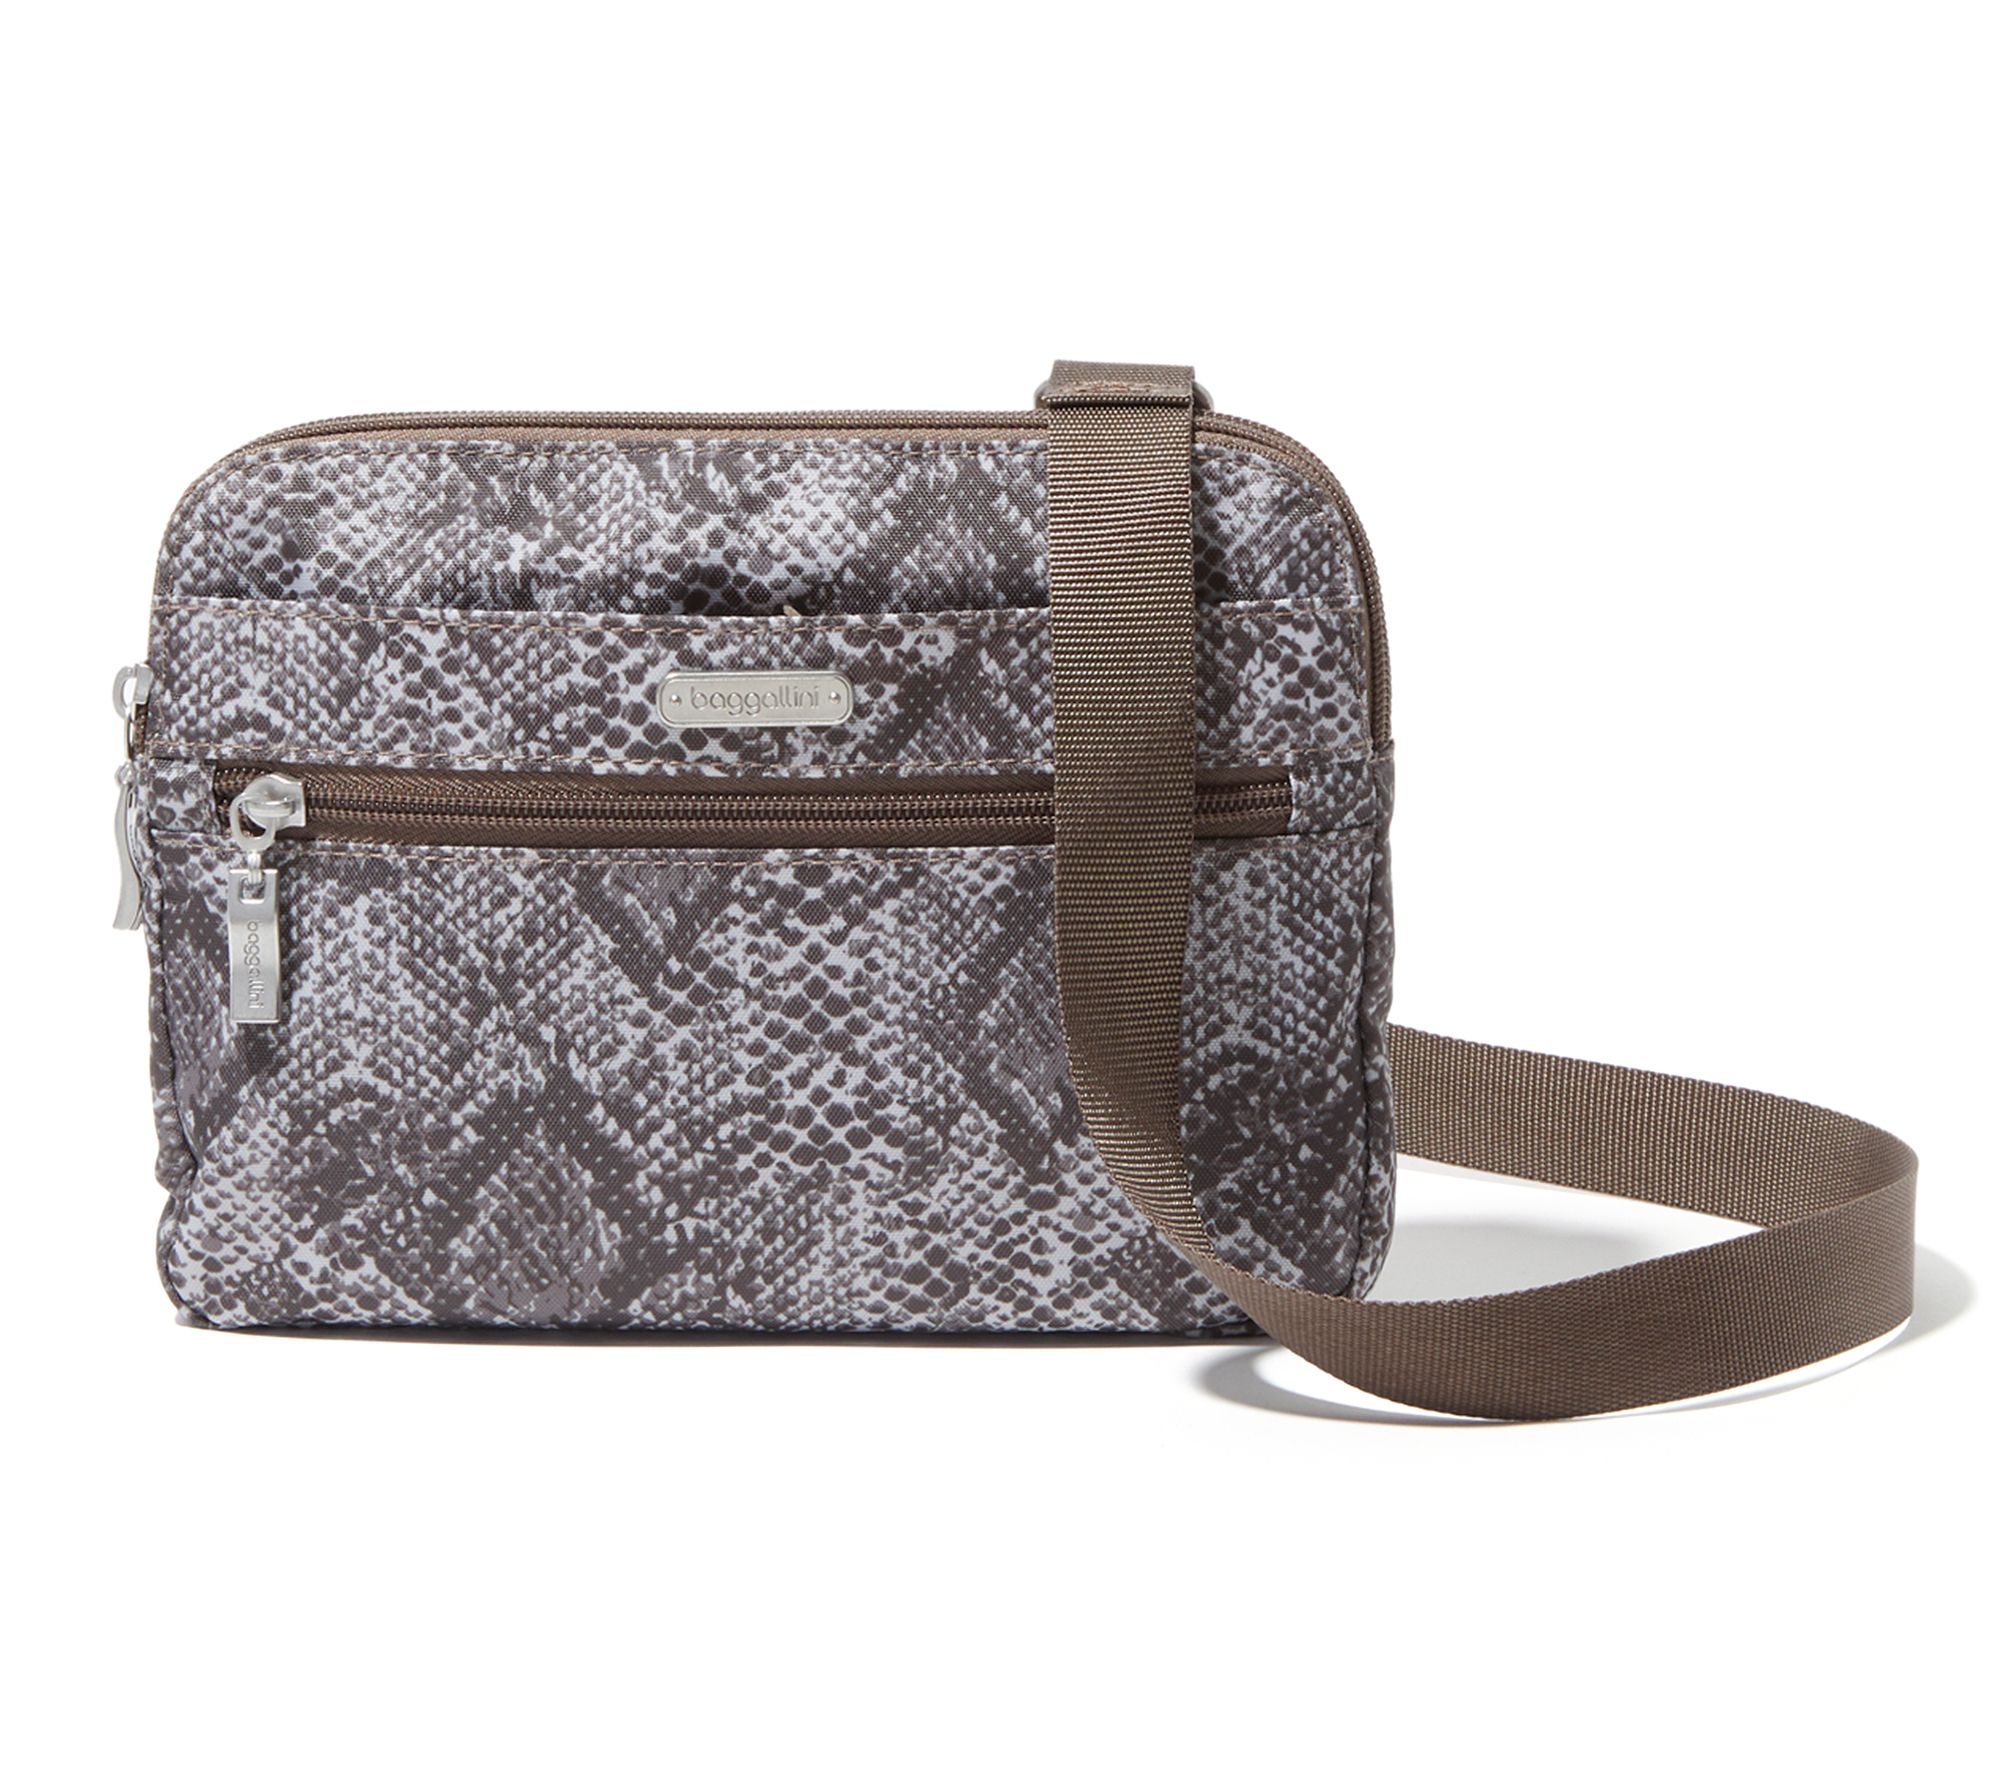 AHDORNED Medium Faux Leather Crossbody with Extra Strap - QVC.com